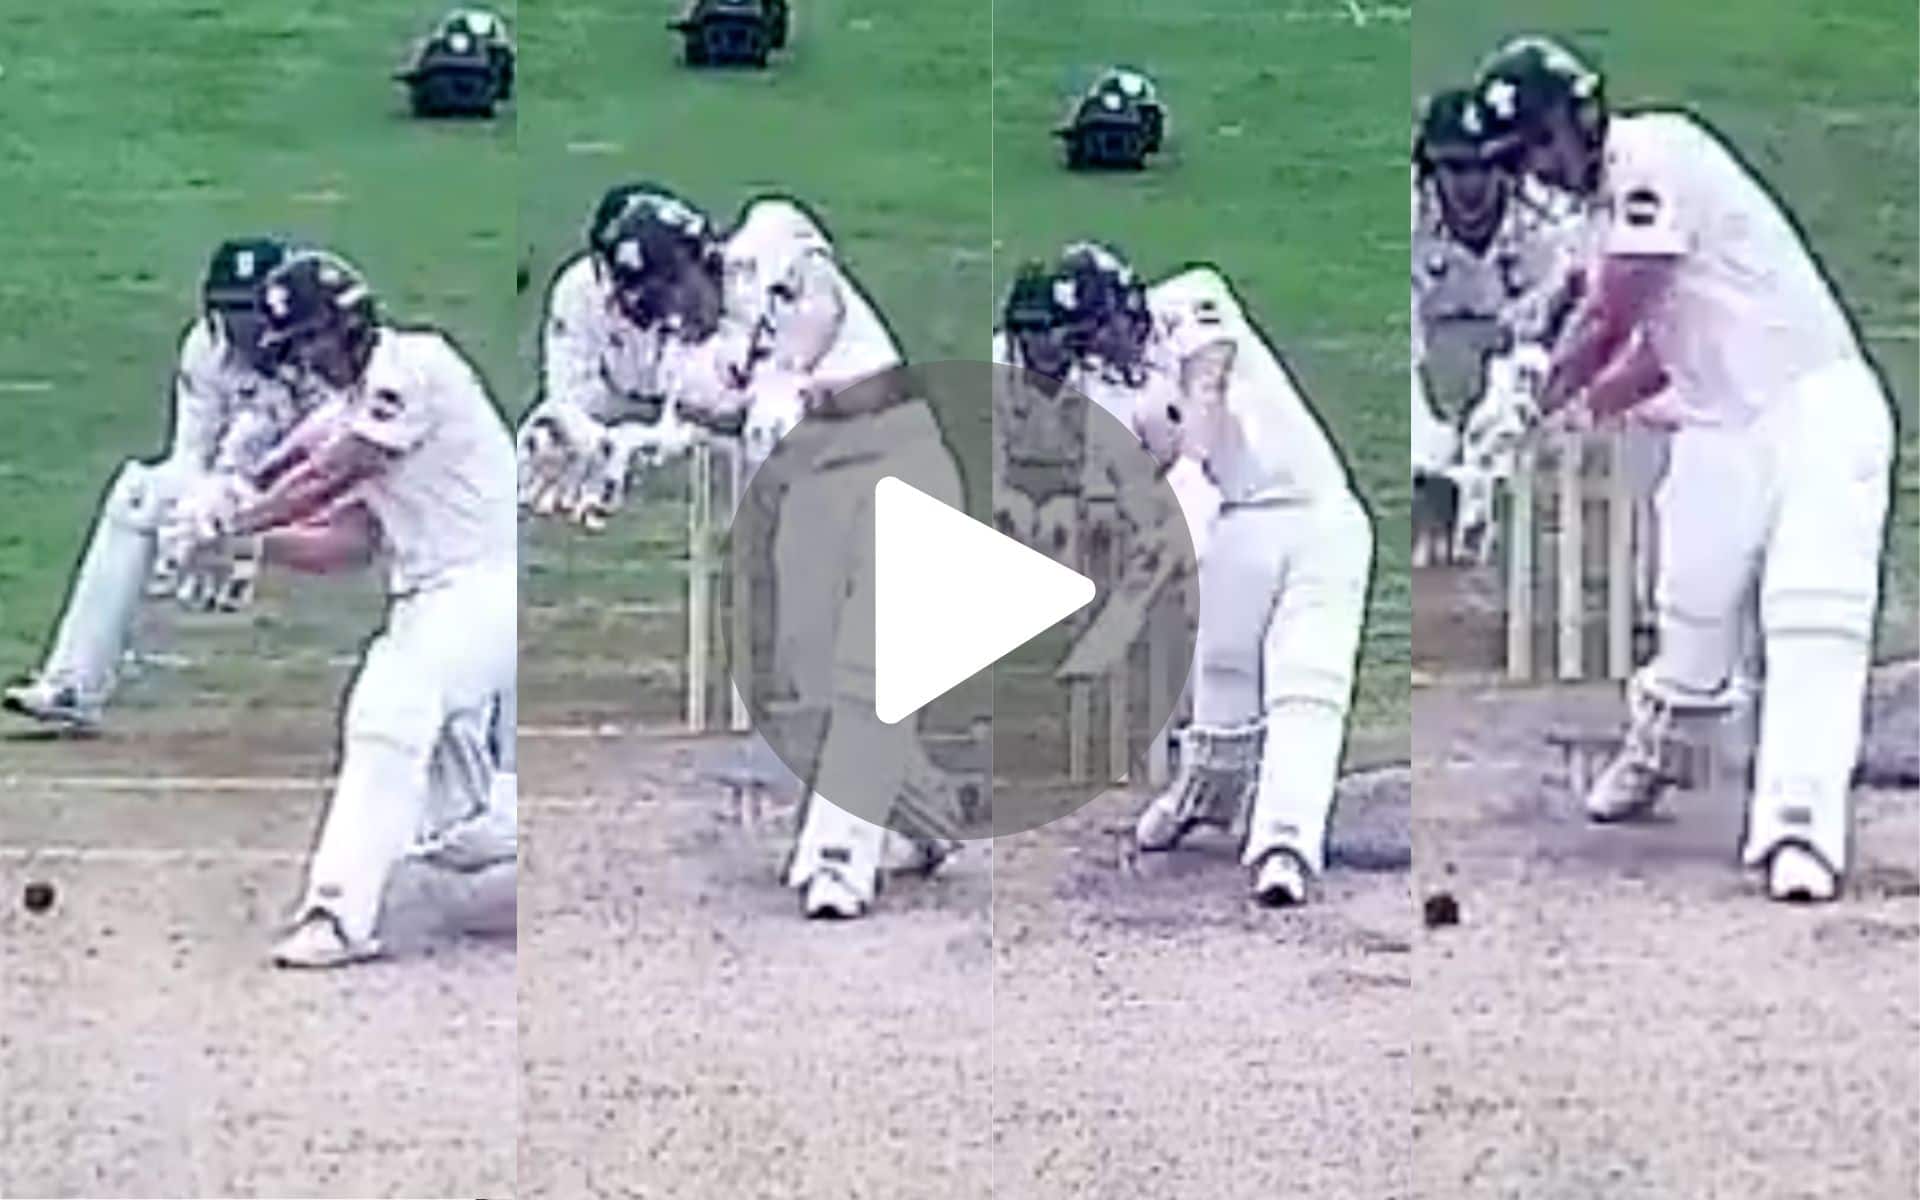 [Watch] 6,6,6,6,6 - Lawrence Goes Crazy With Five Consecutive Sixes Vs Shoaib Bashir